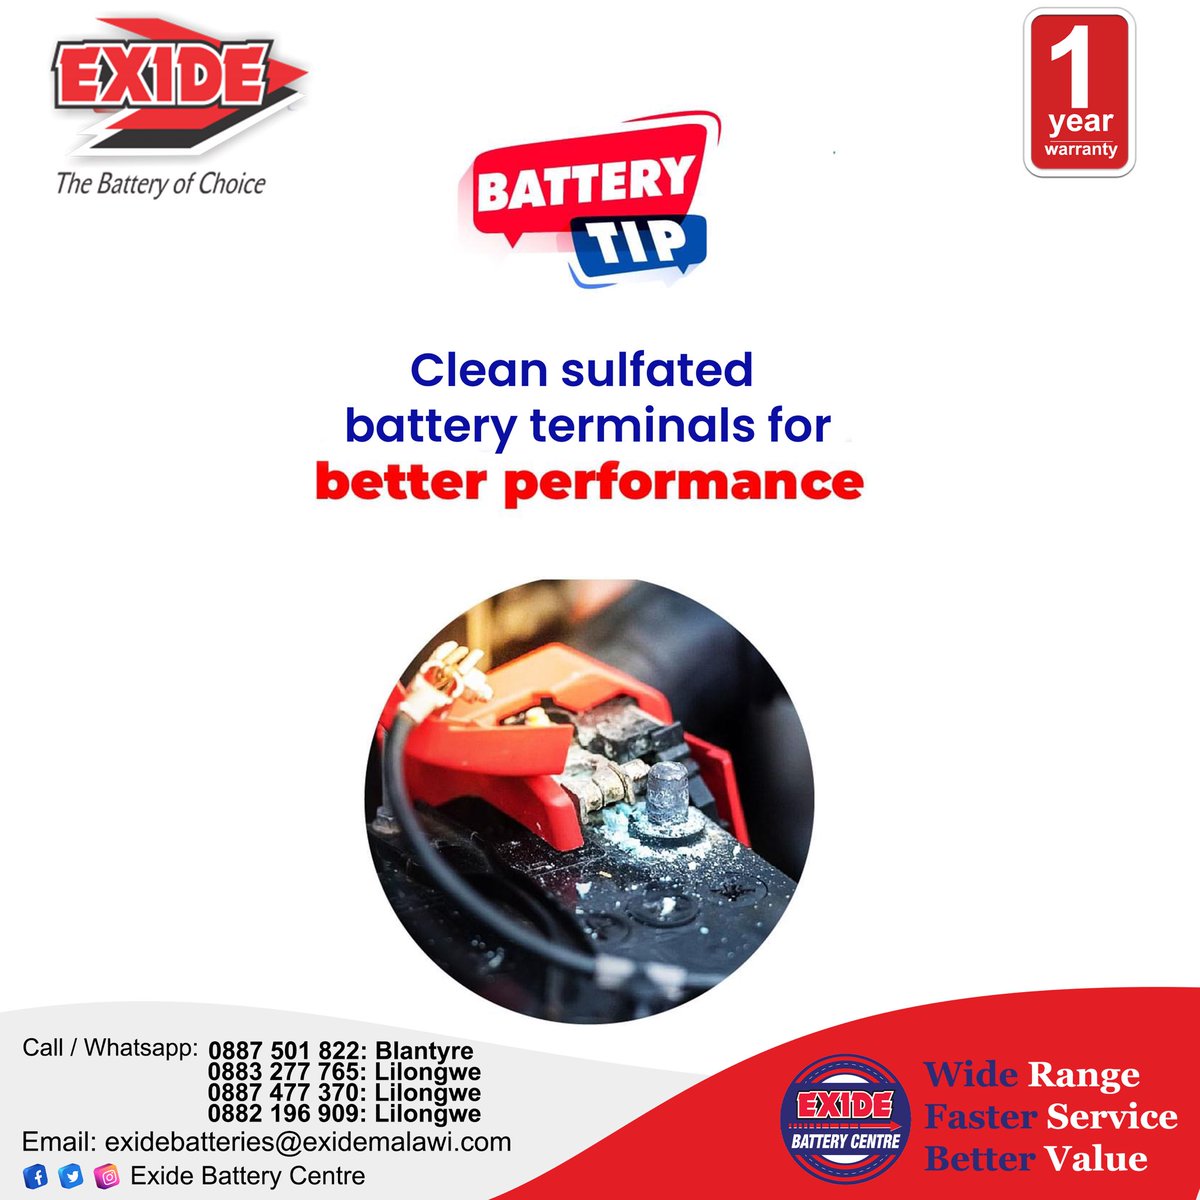 Pour hot water over the corroded terminals and apply petroleum jelly to prevent further corrosion.

#cartip #widerange #fasterservice #bettervalue #ExideBatteryCentre